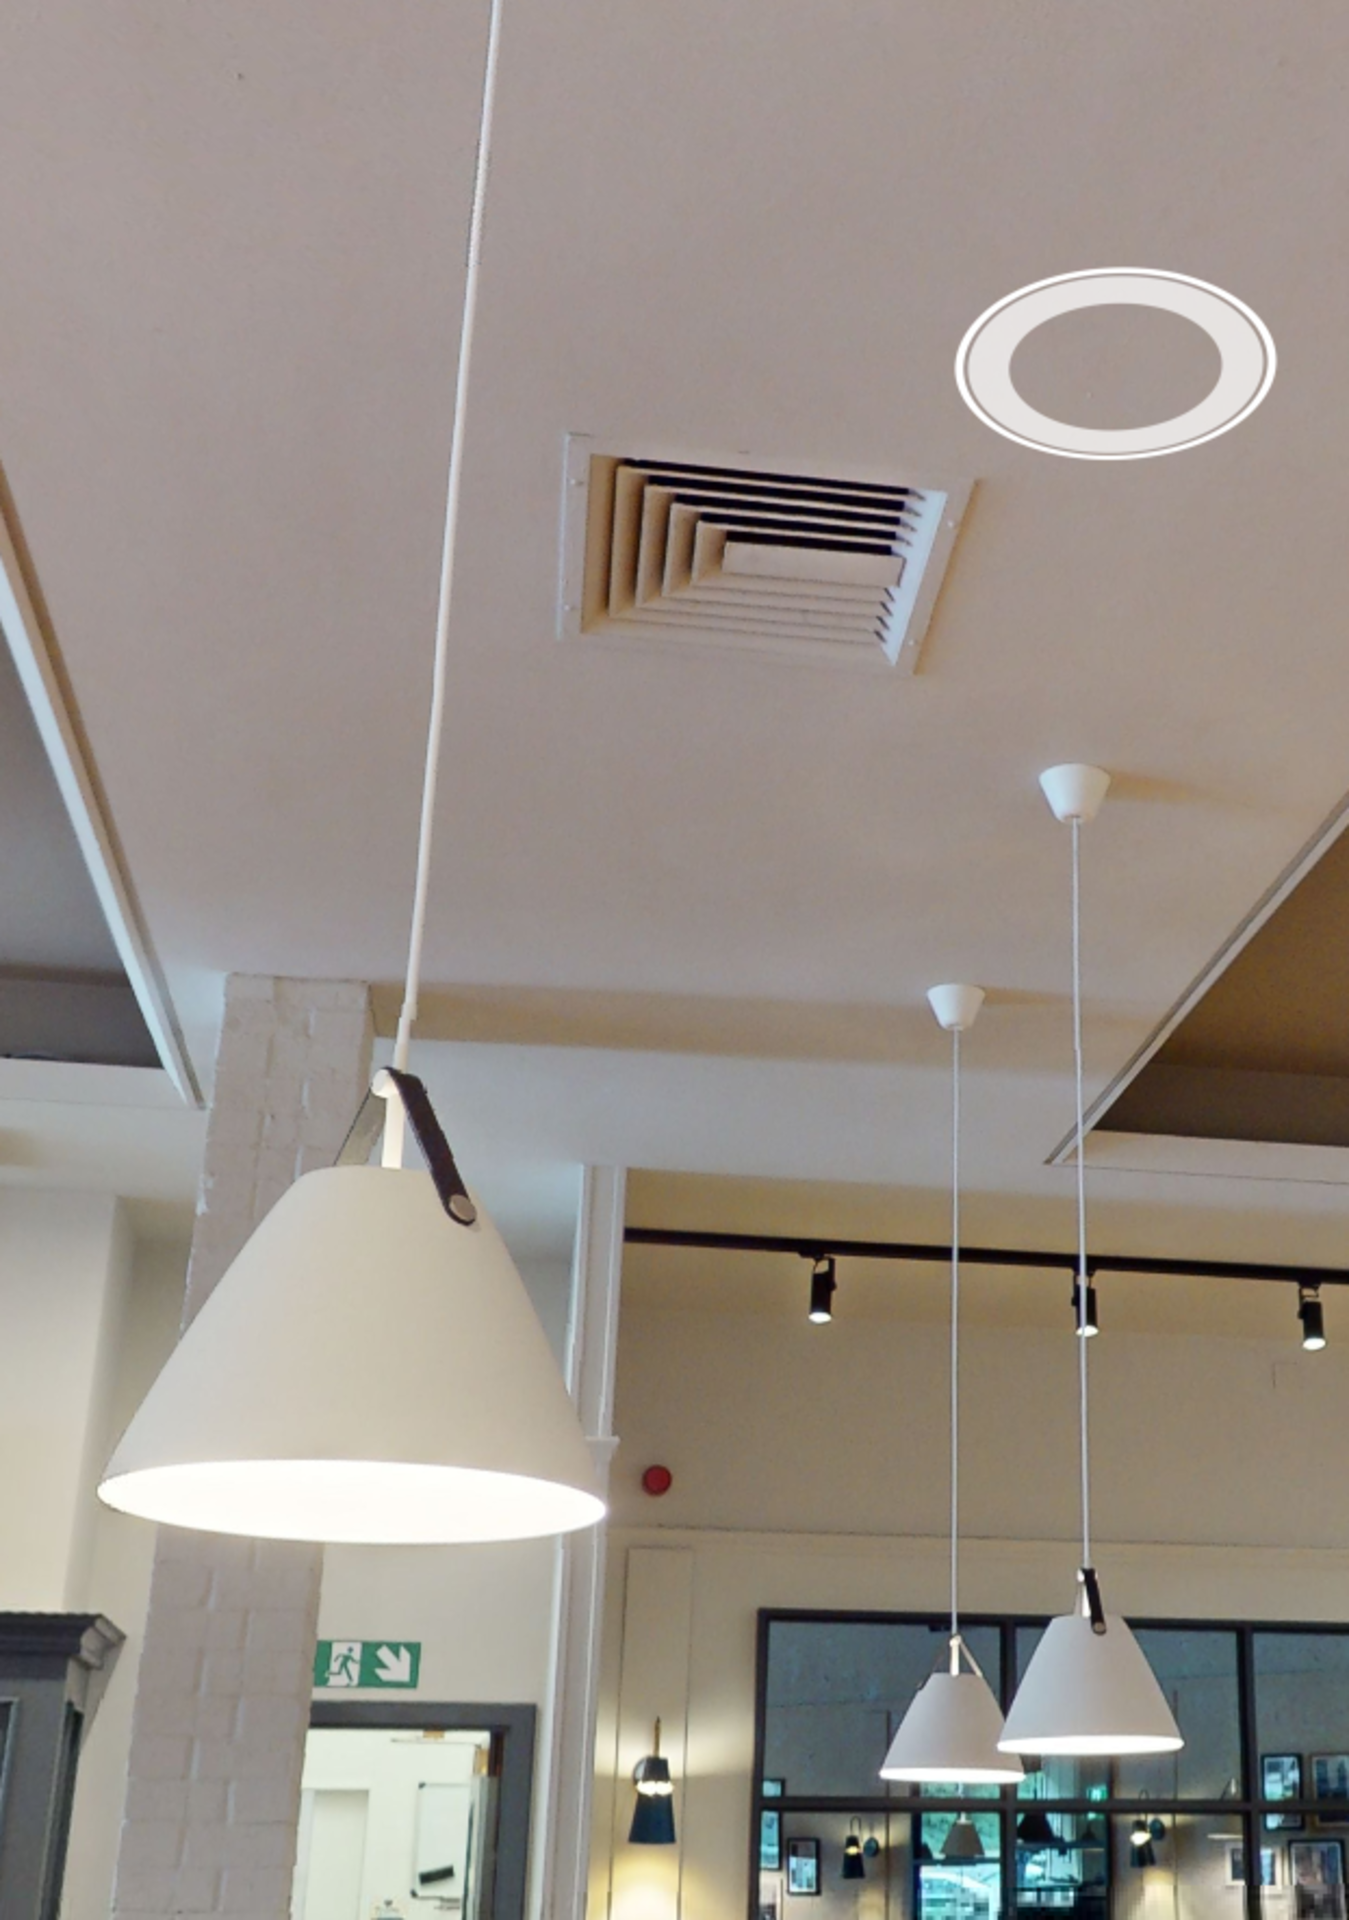 6 x Suspending Ceiling Pendant Lights Featuring Beige Metal Shades With Brown Leather Straps - Image 5 of 6